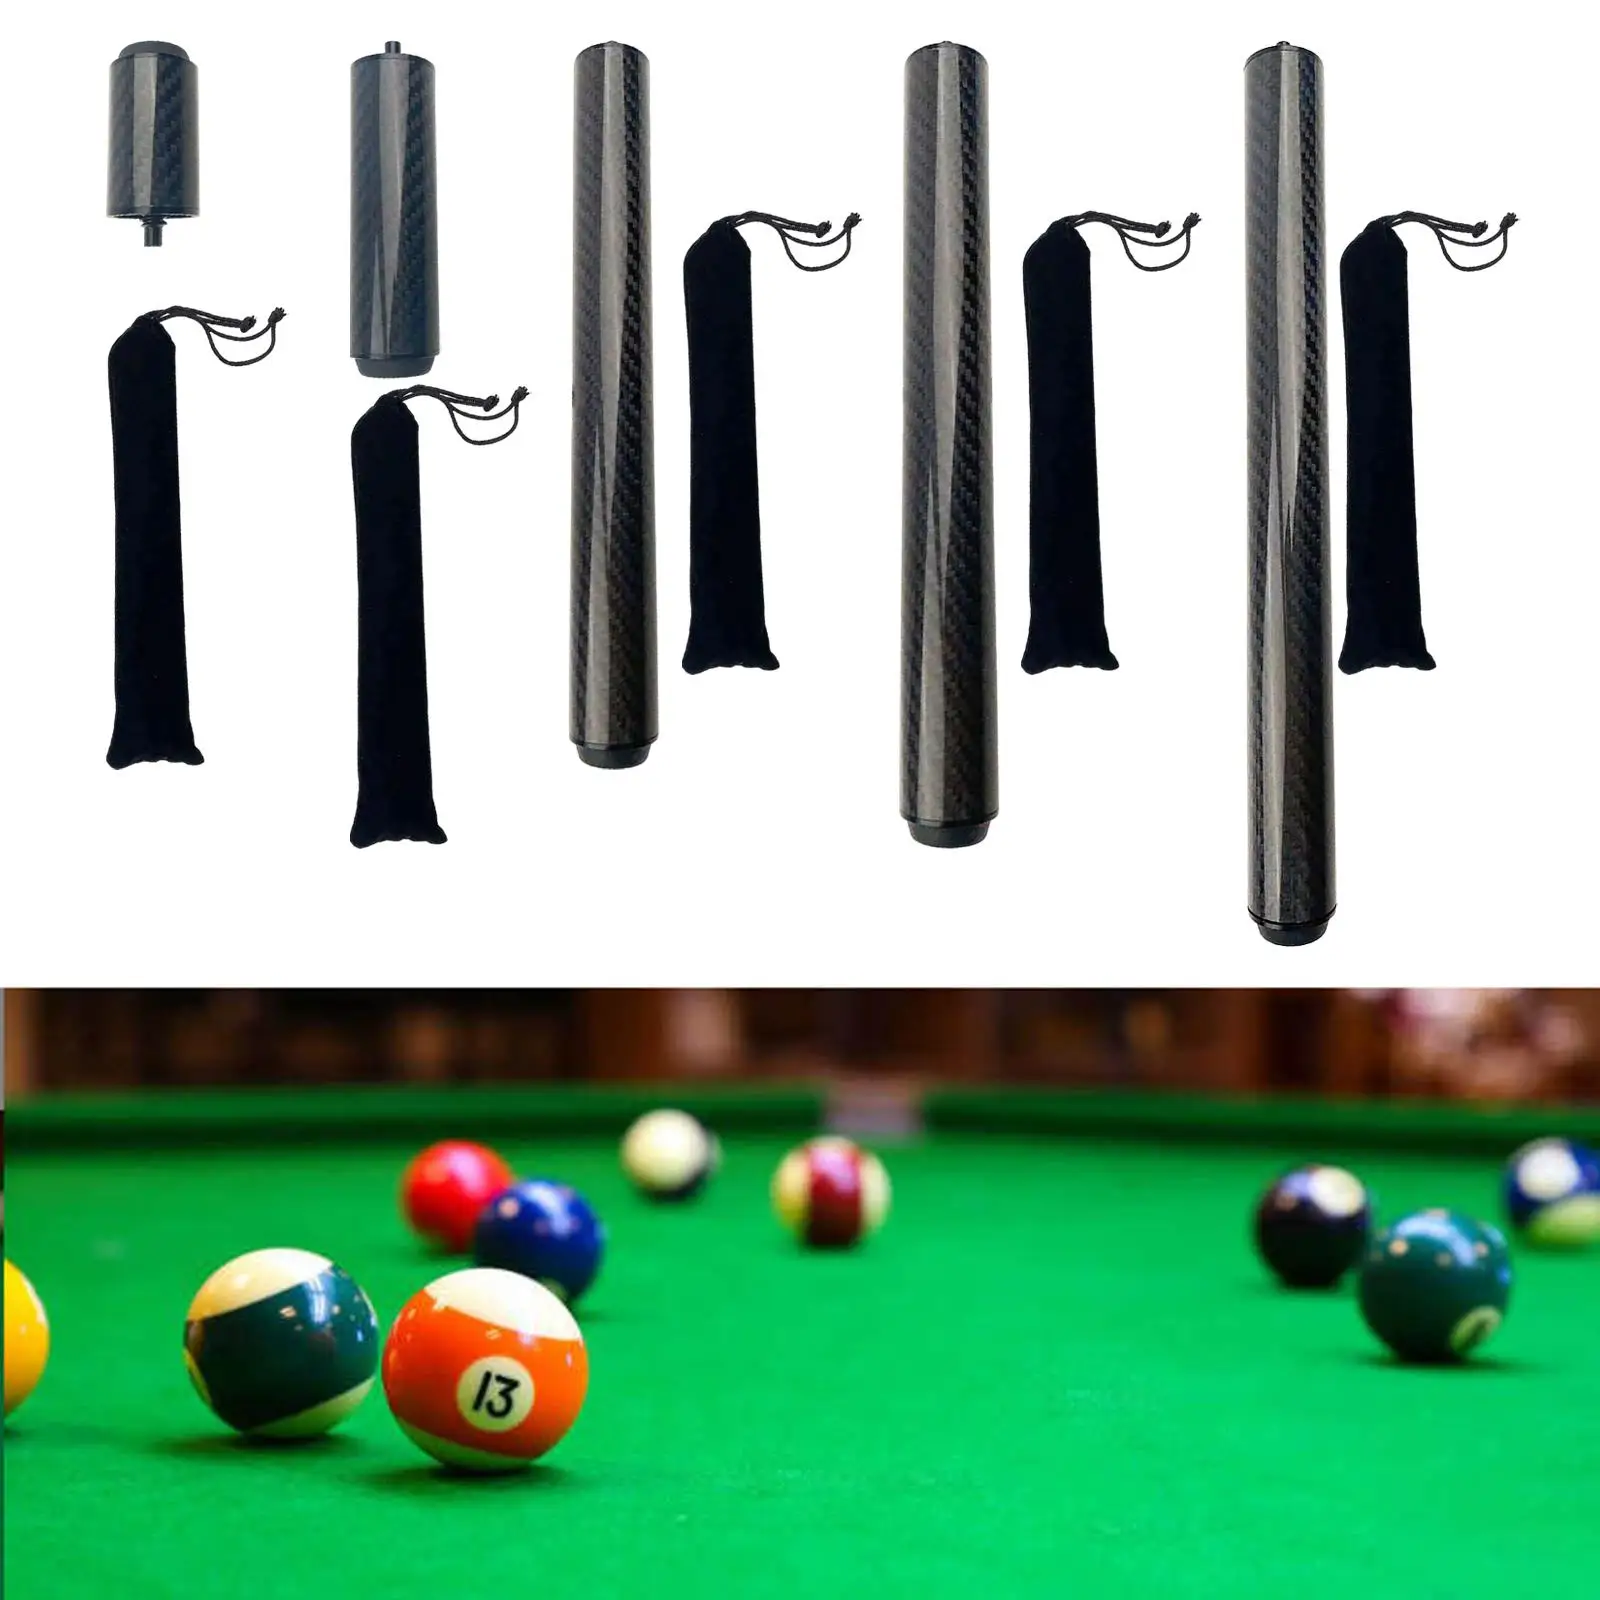 Billiards Pool Cue Extension Compact Carbon Fiber Cue Stick Extenders Billiard Connect Shaft Snooker for Billiard Cues Beginners